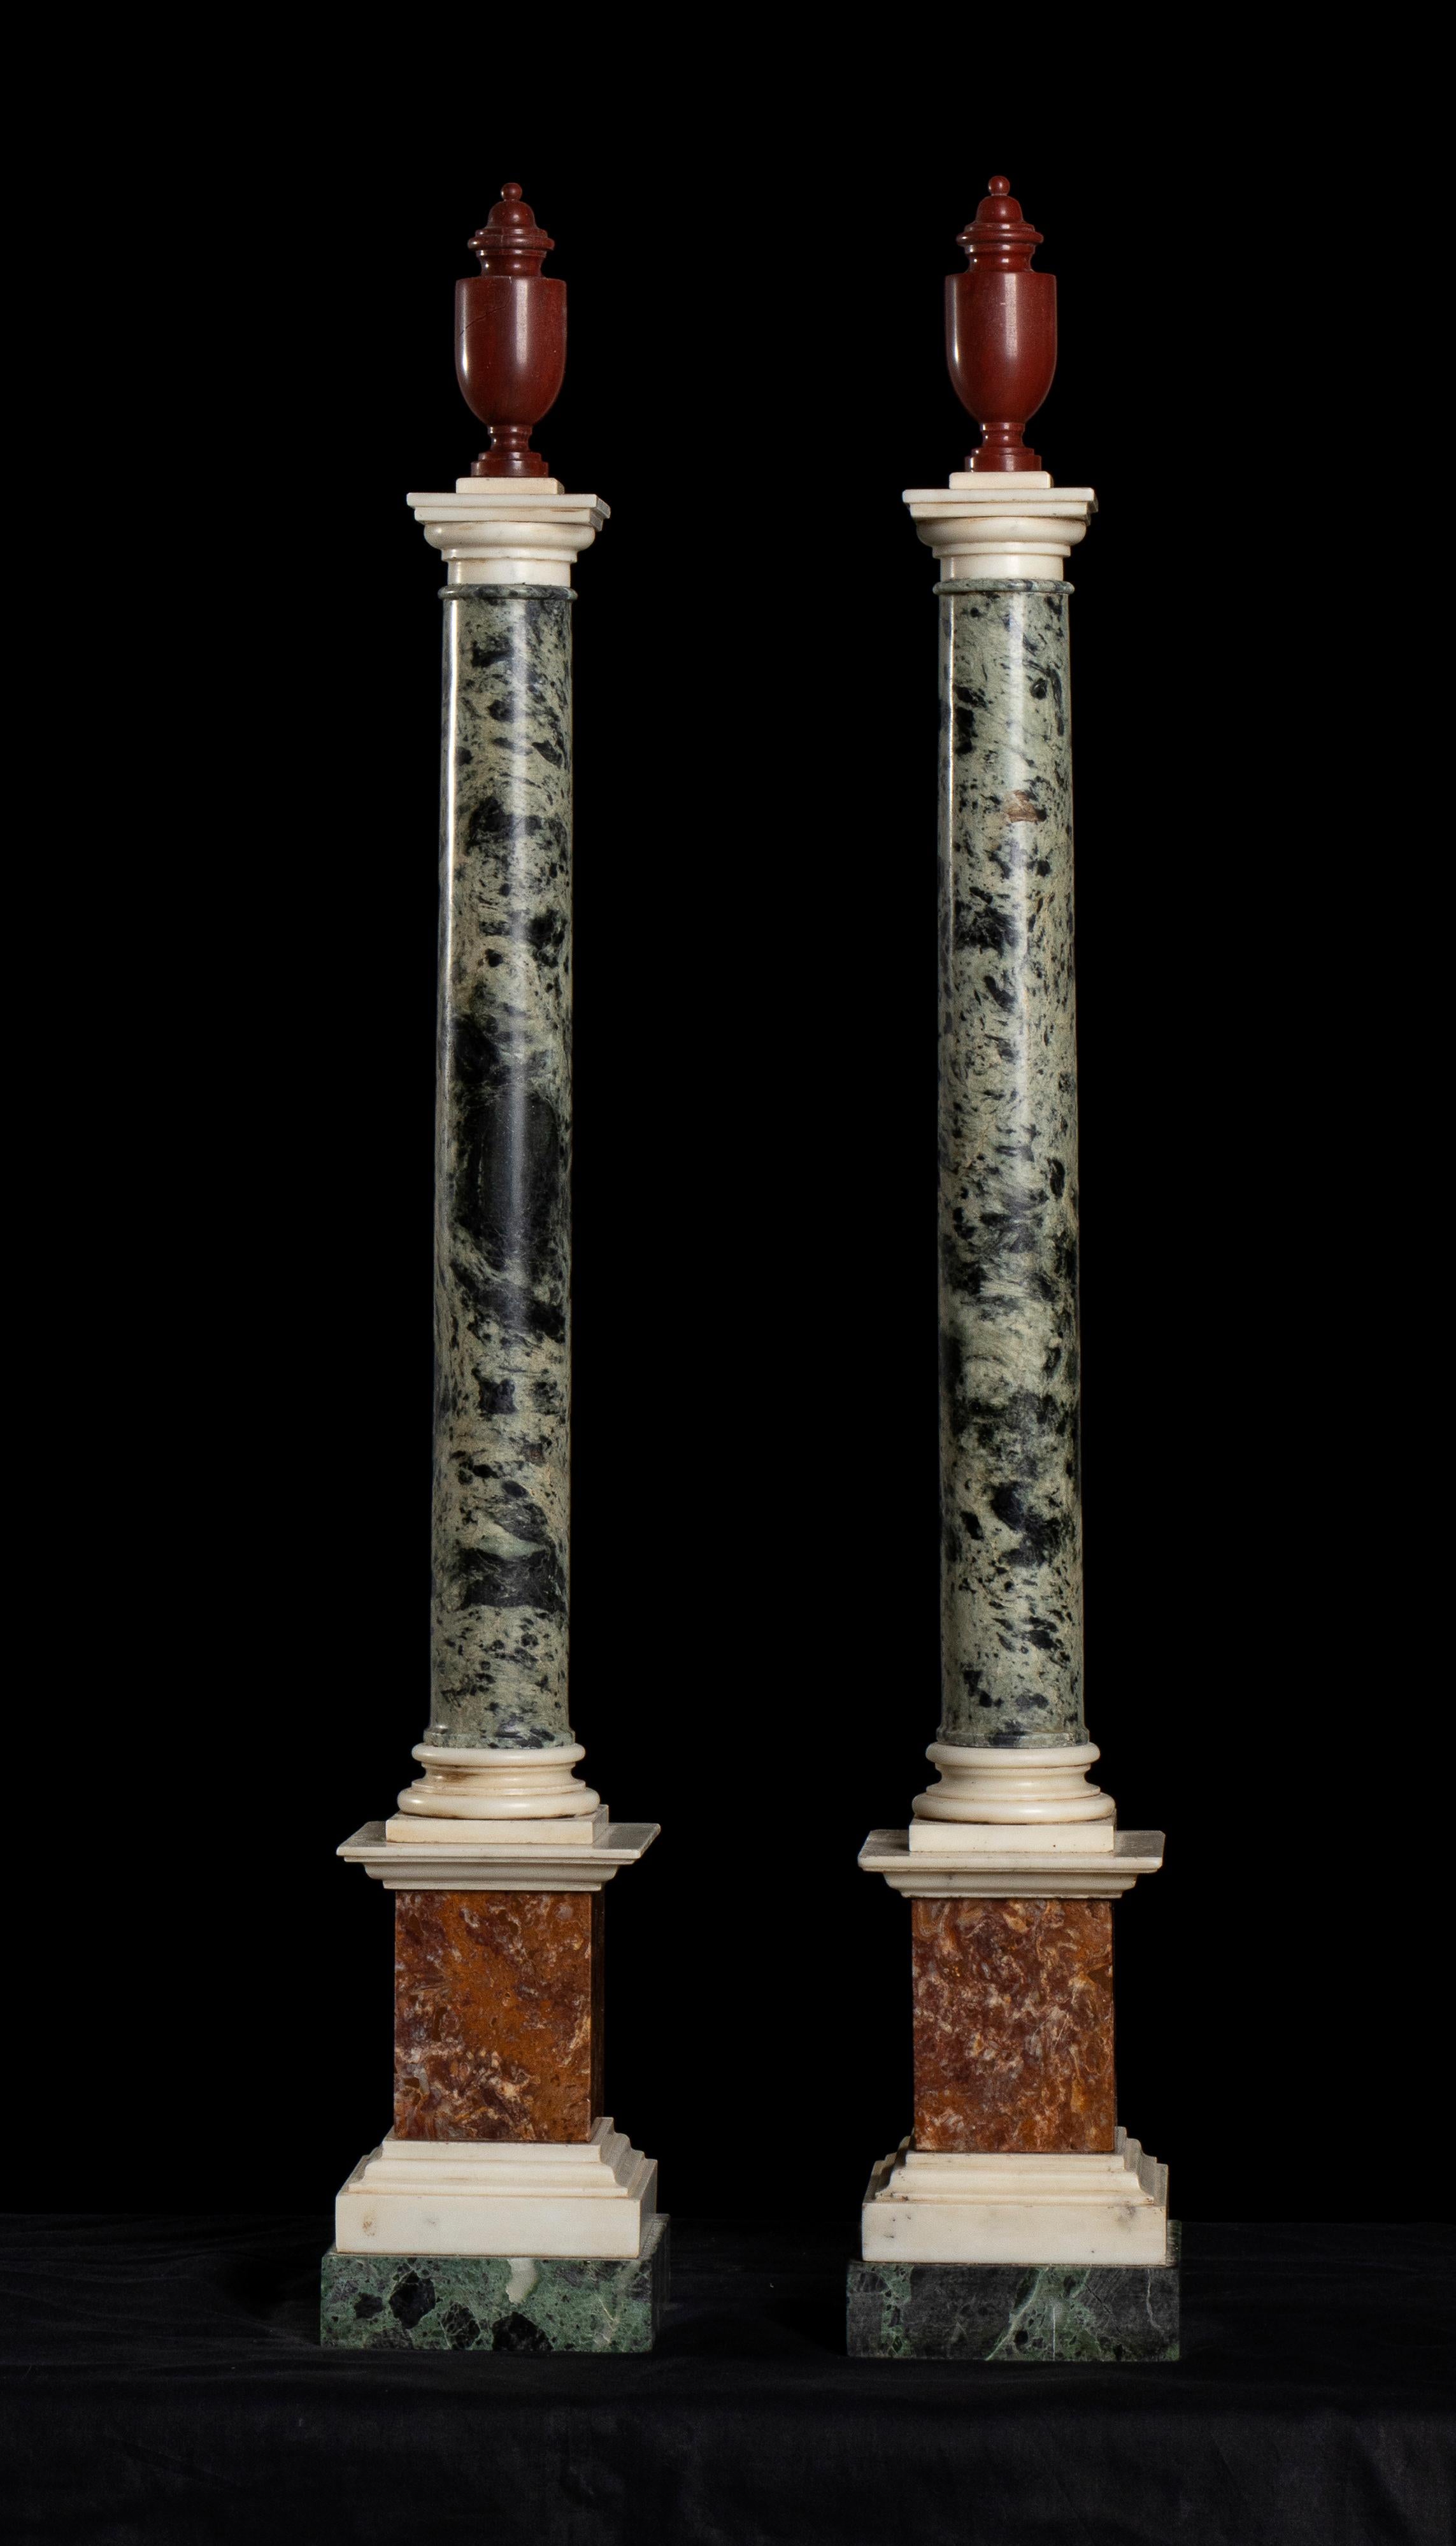 Pair of Roman Marble Red, Green, Onyx and White Models of Pedestals Grand Tour - Black Figurative Sculpture by Unknown